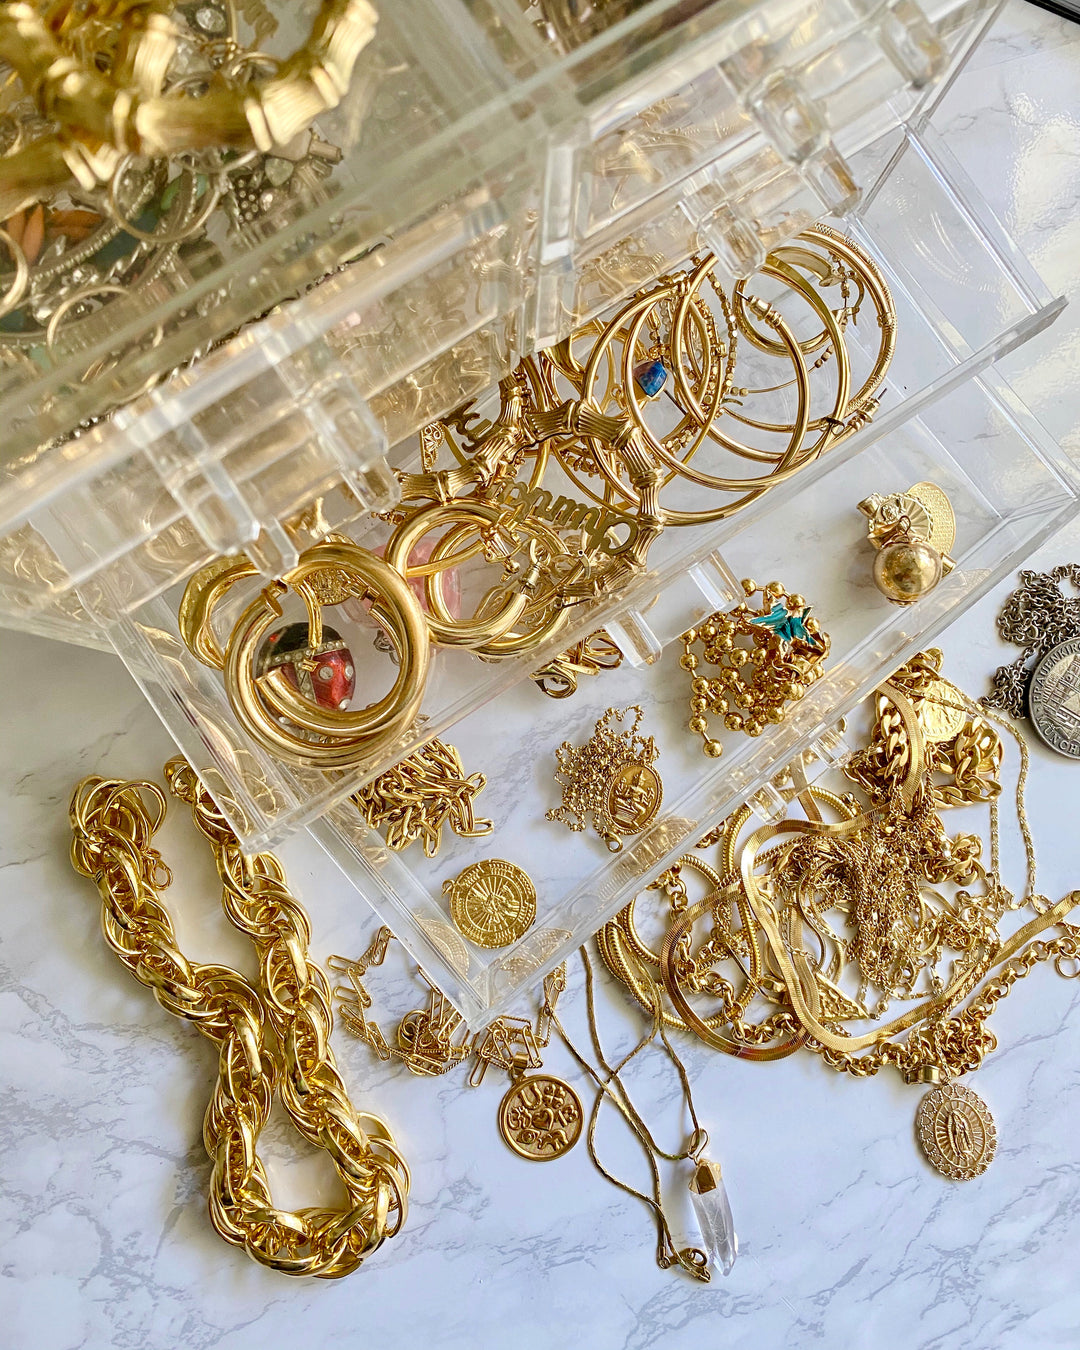 How to store your Jewelry so it doesn't tarnish